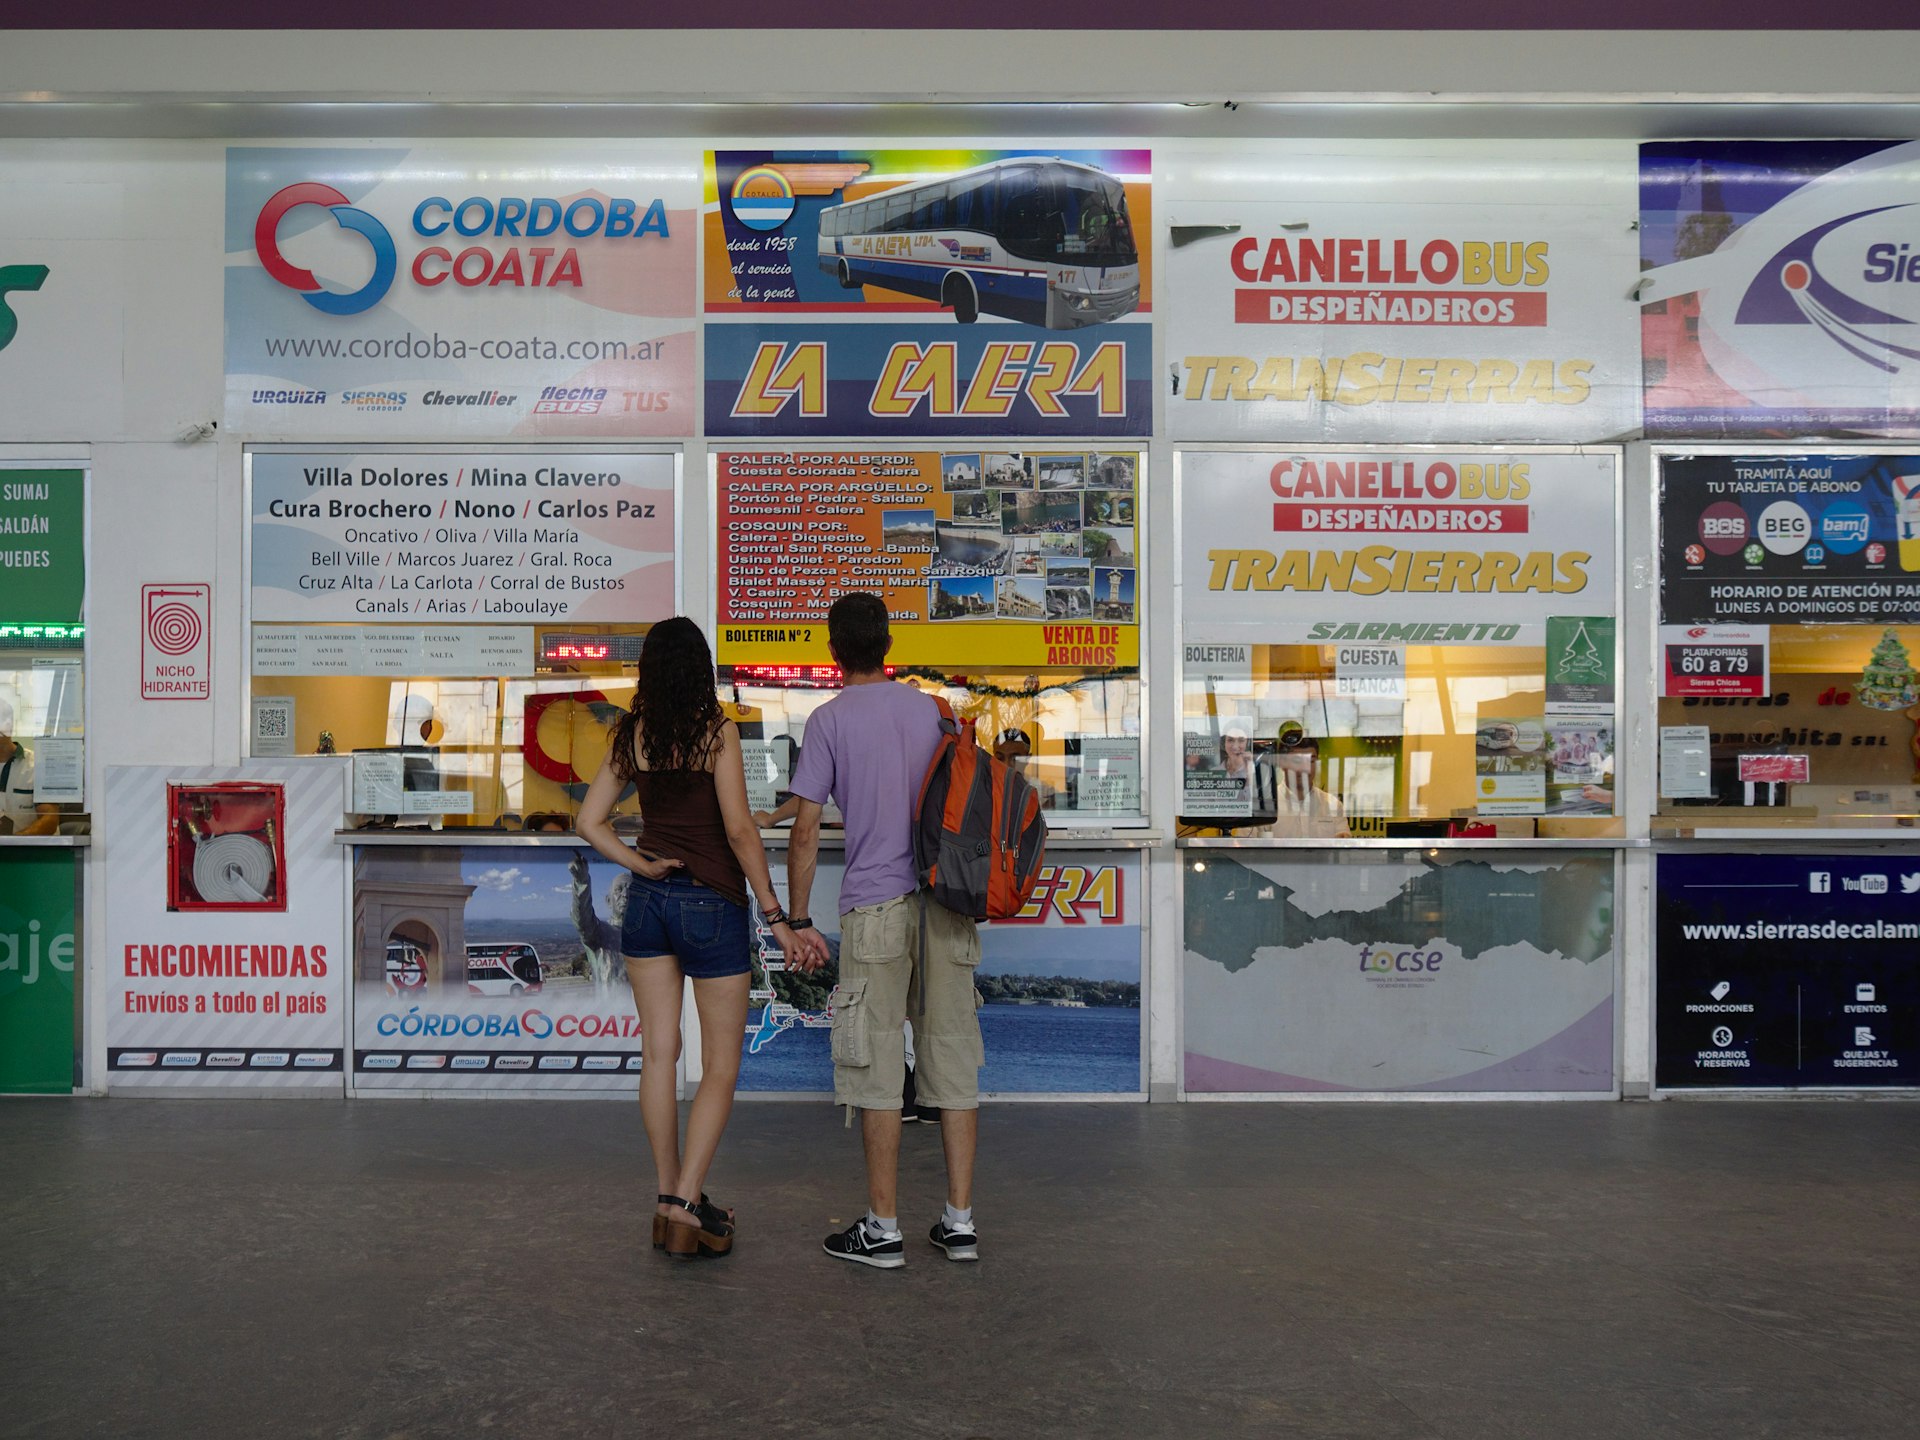 A couple stand holding hands while they look up at the ticket office displays in a bus station